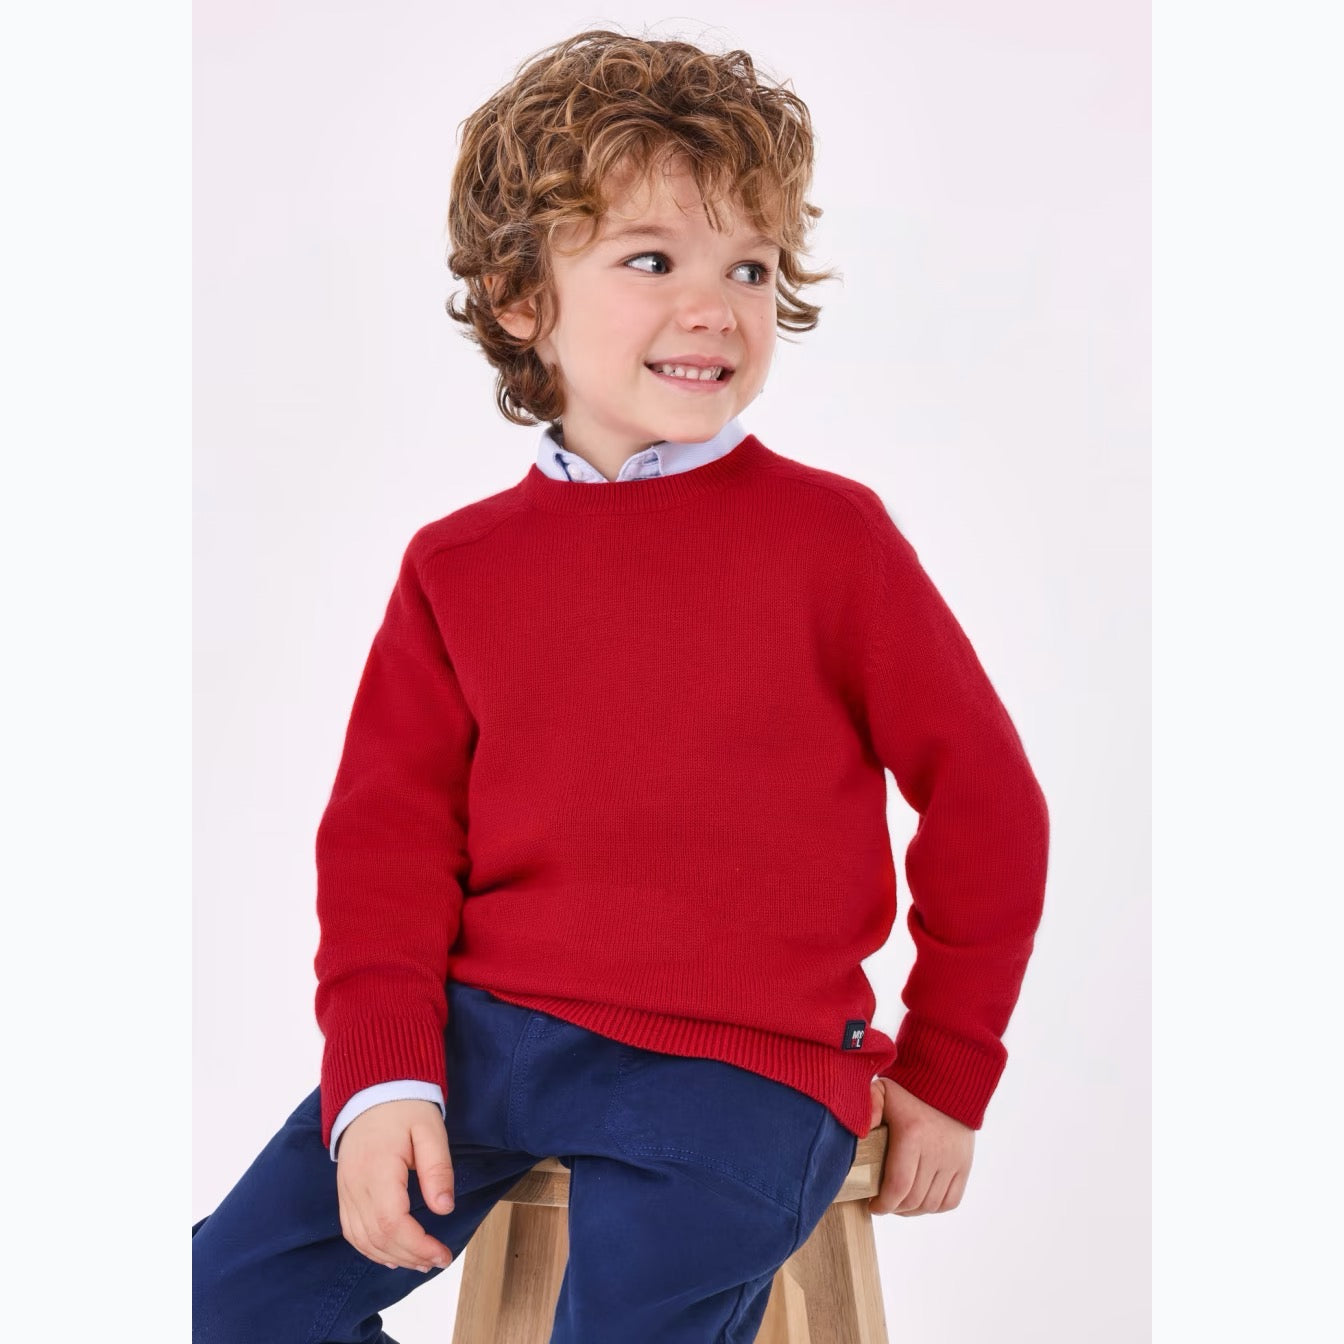 Mayoral Boys Sweater 311 Red Clothing 3YRS / Red,4YRS / Red,5YRS / Red,6YRS / Red,7YRS / Red,8YRS / Red,9YRS / Red